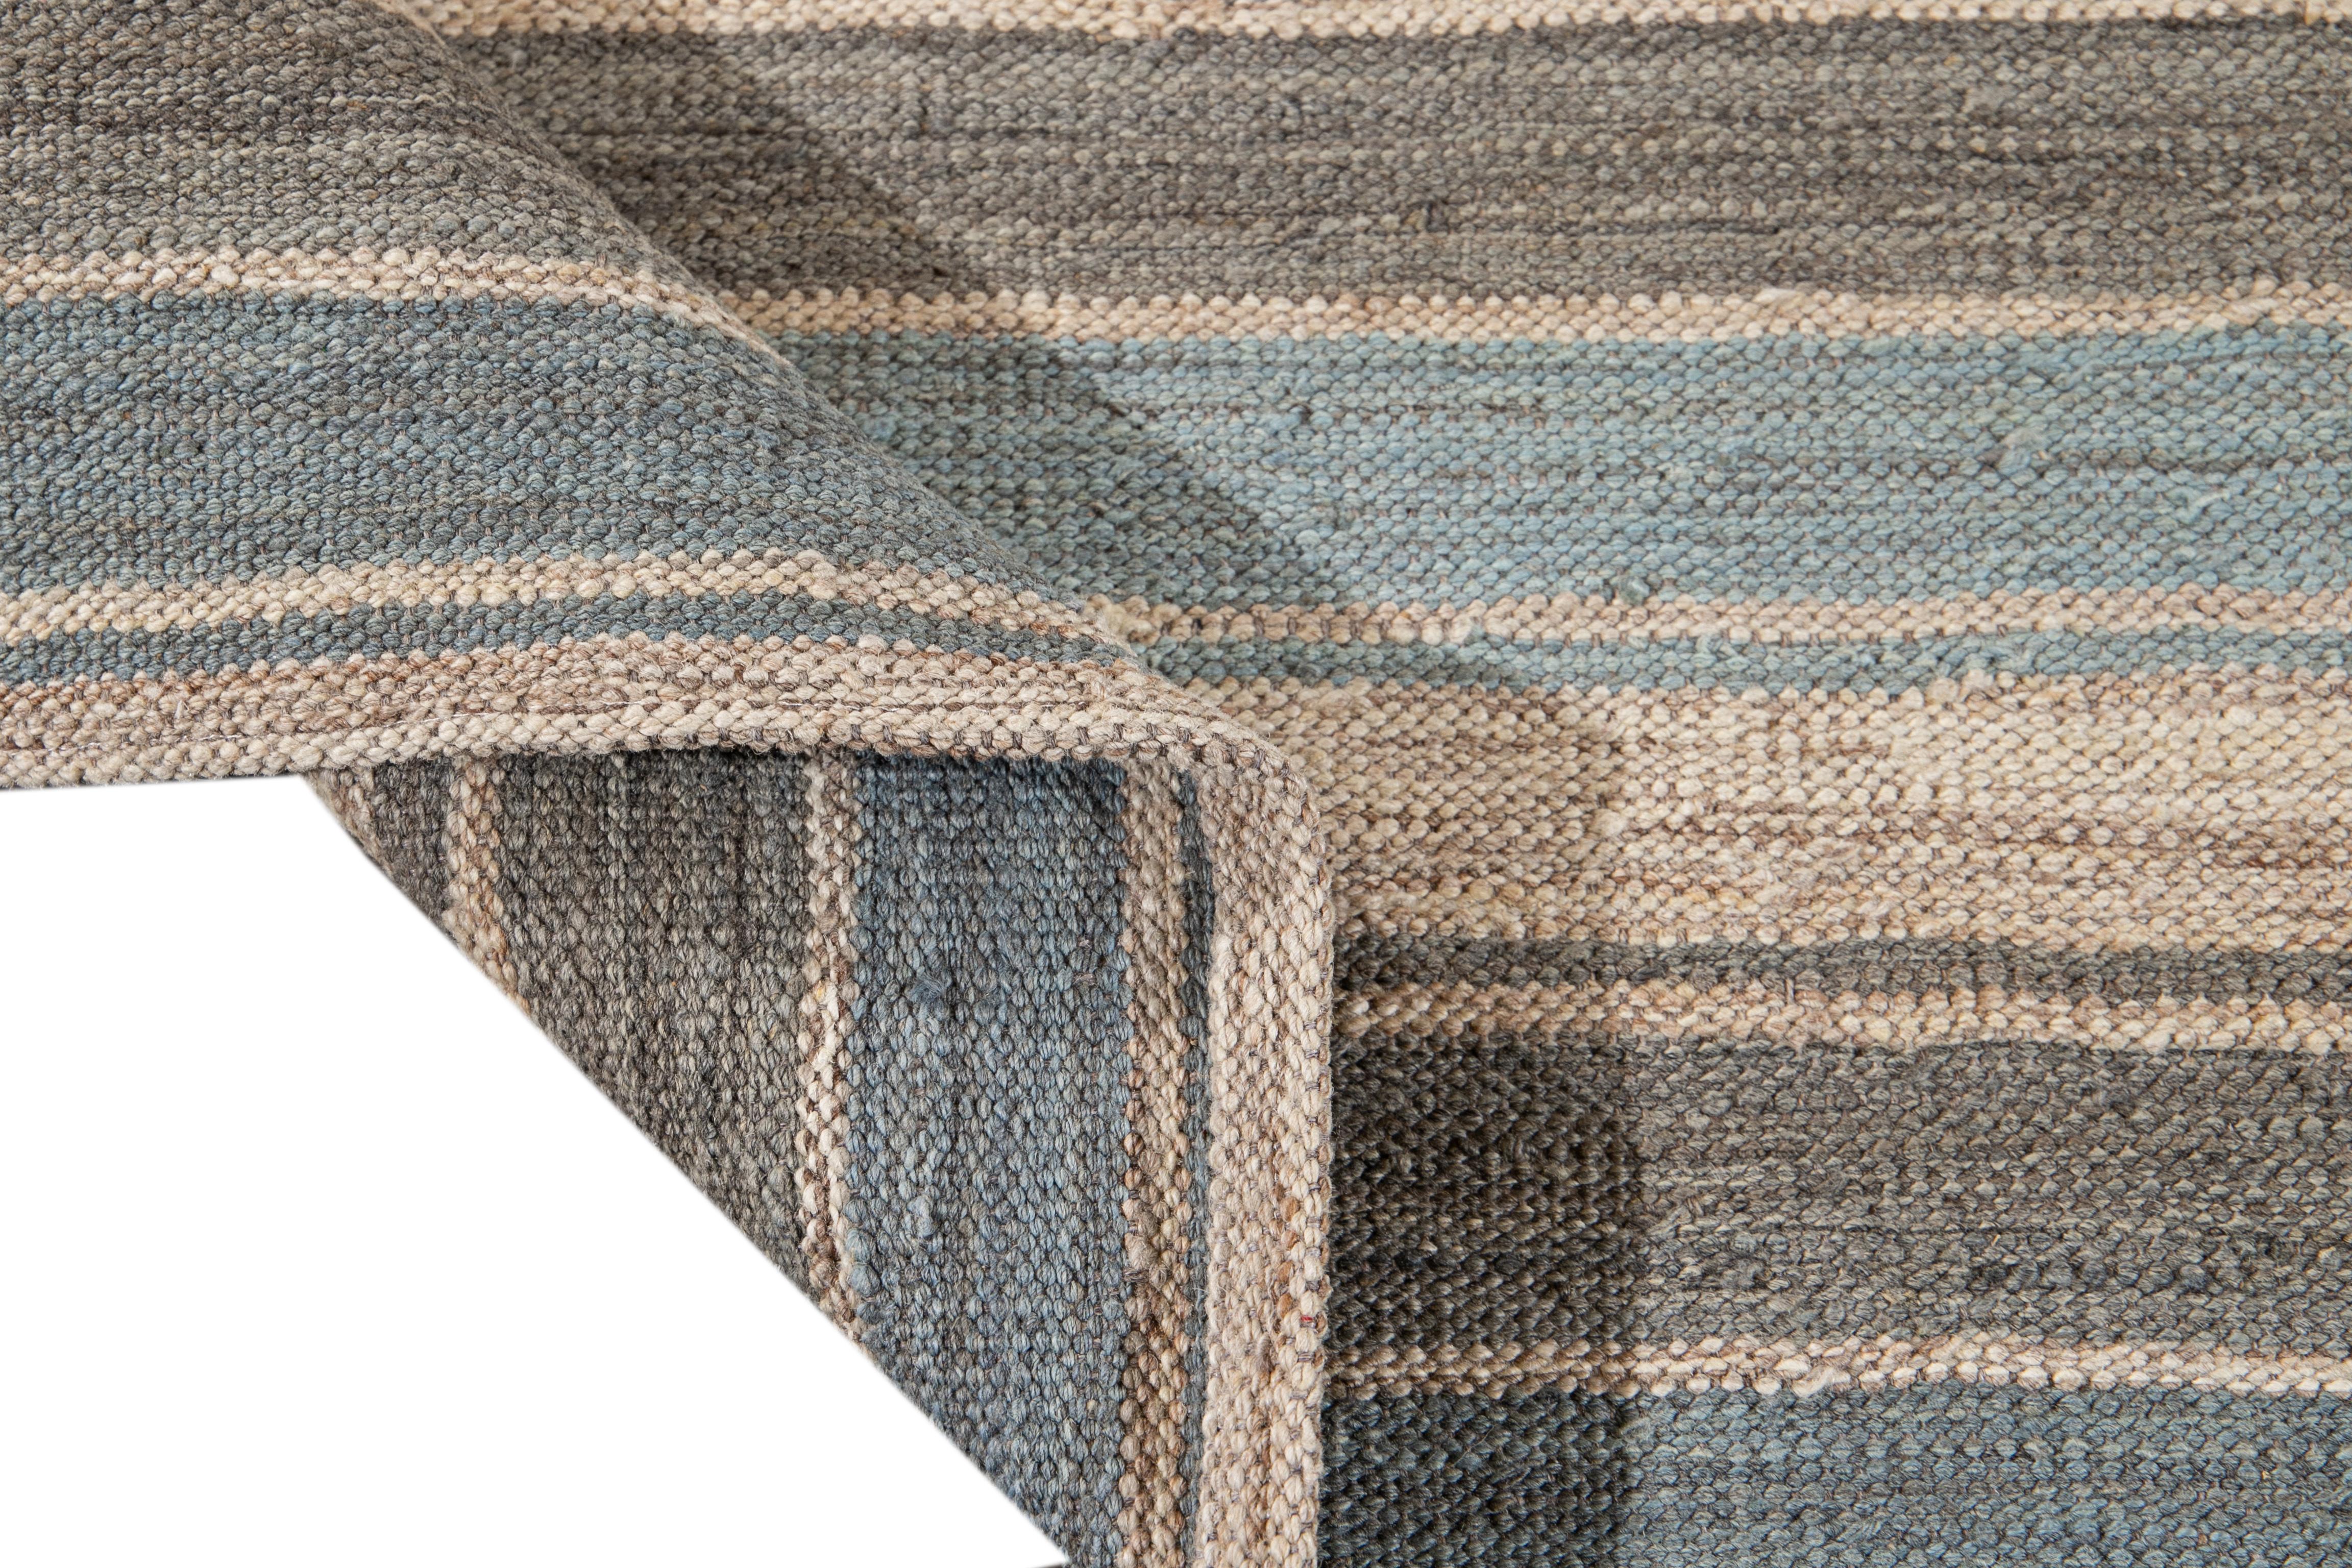 Beautiful modern flat-weave Kilim hand knotted wool rug. This rug has a field of a blue, gray, and beige color in a gorgeous all-over geometric stripe design.

This rug measures 8' 10